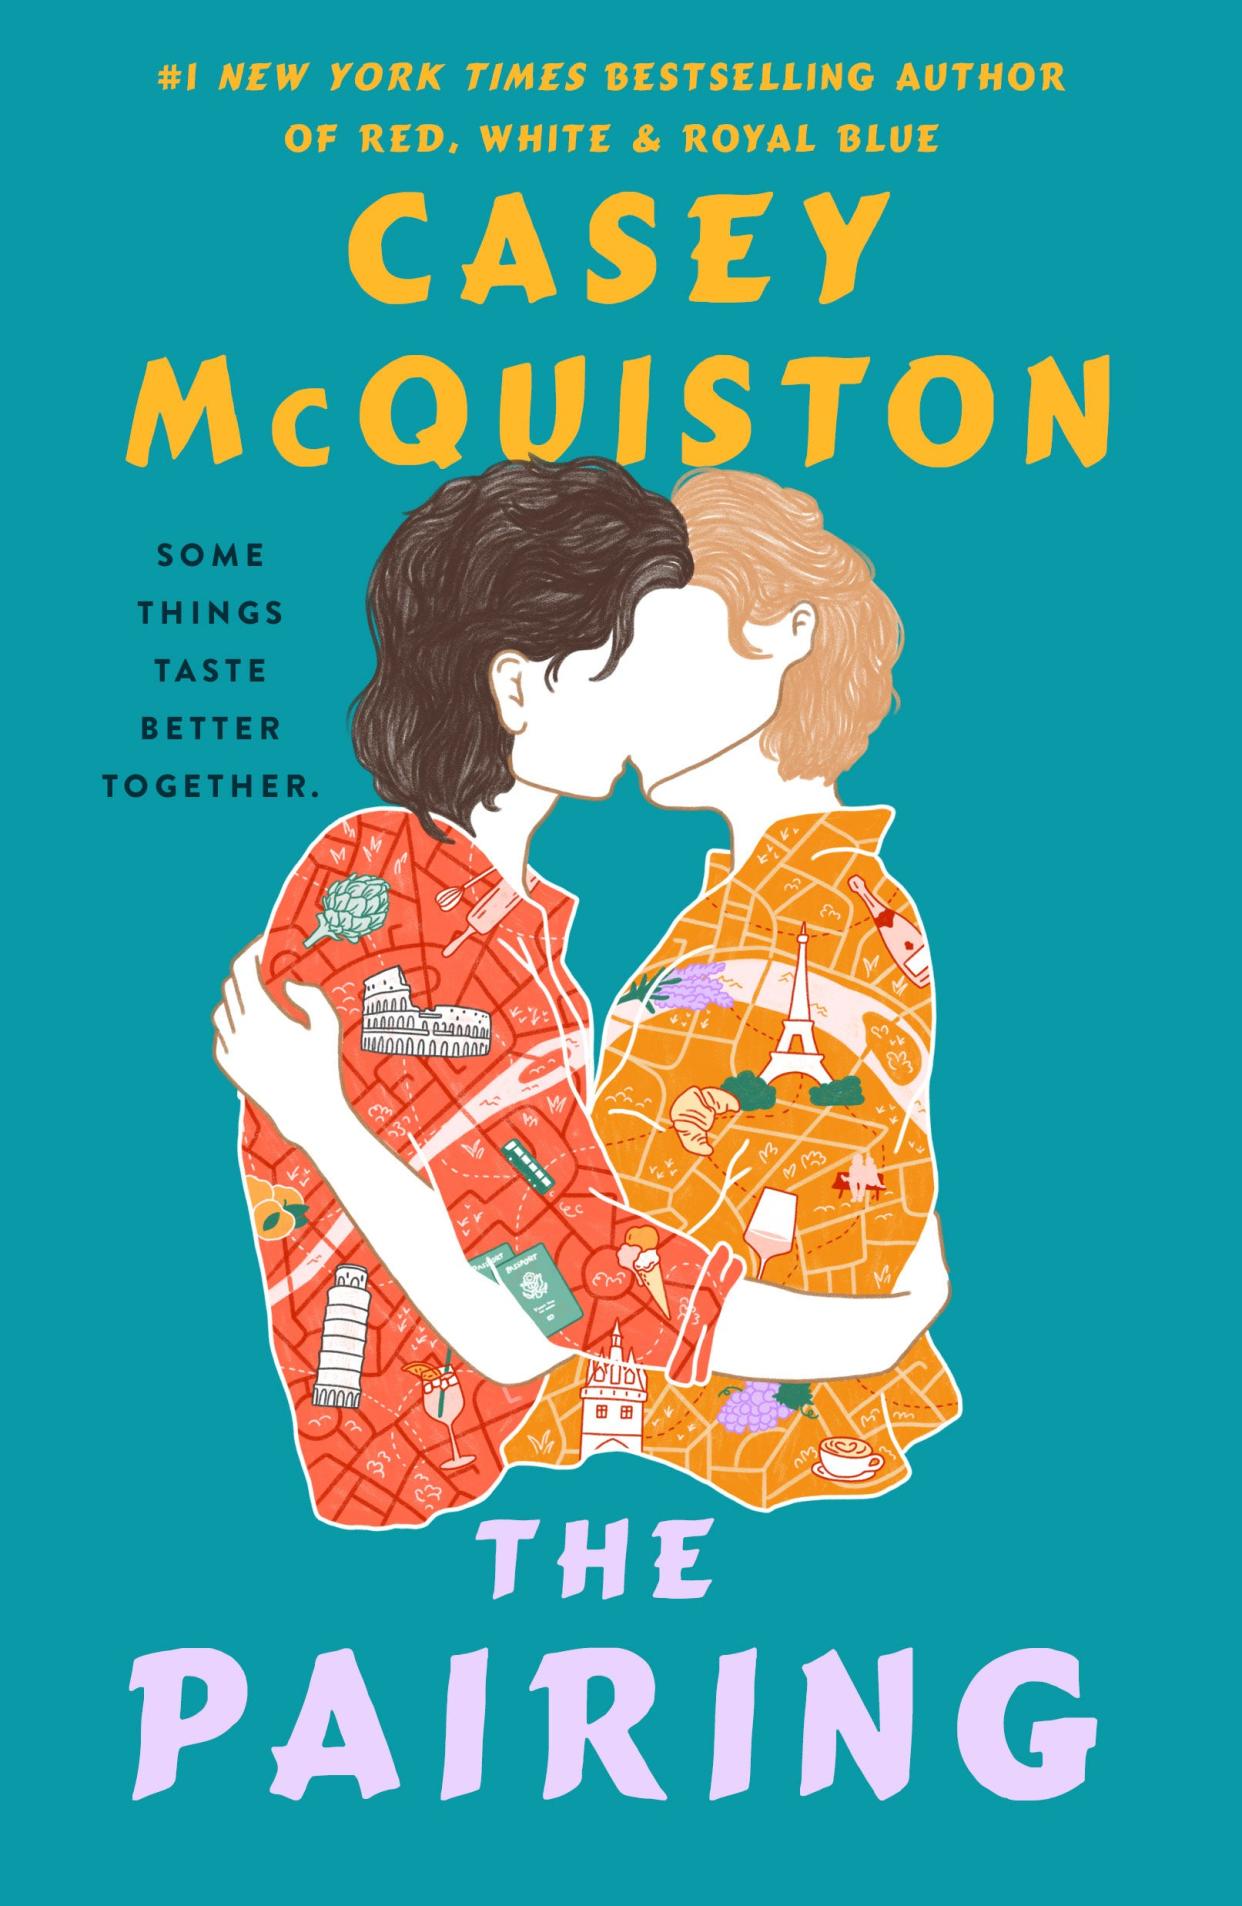 "The Pairing" by Casey McQuiston follows two exes who accidentally end up on the same European food and wine tasting tour.